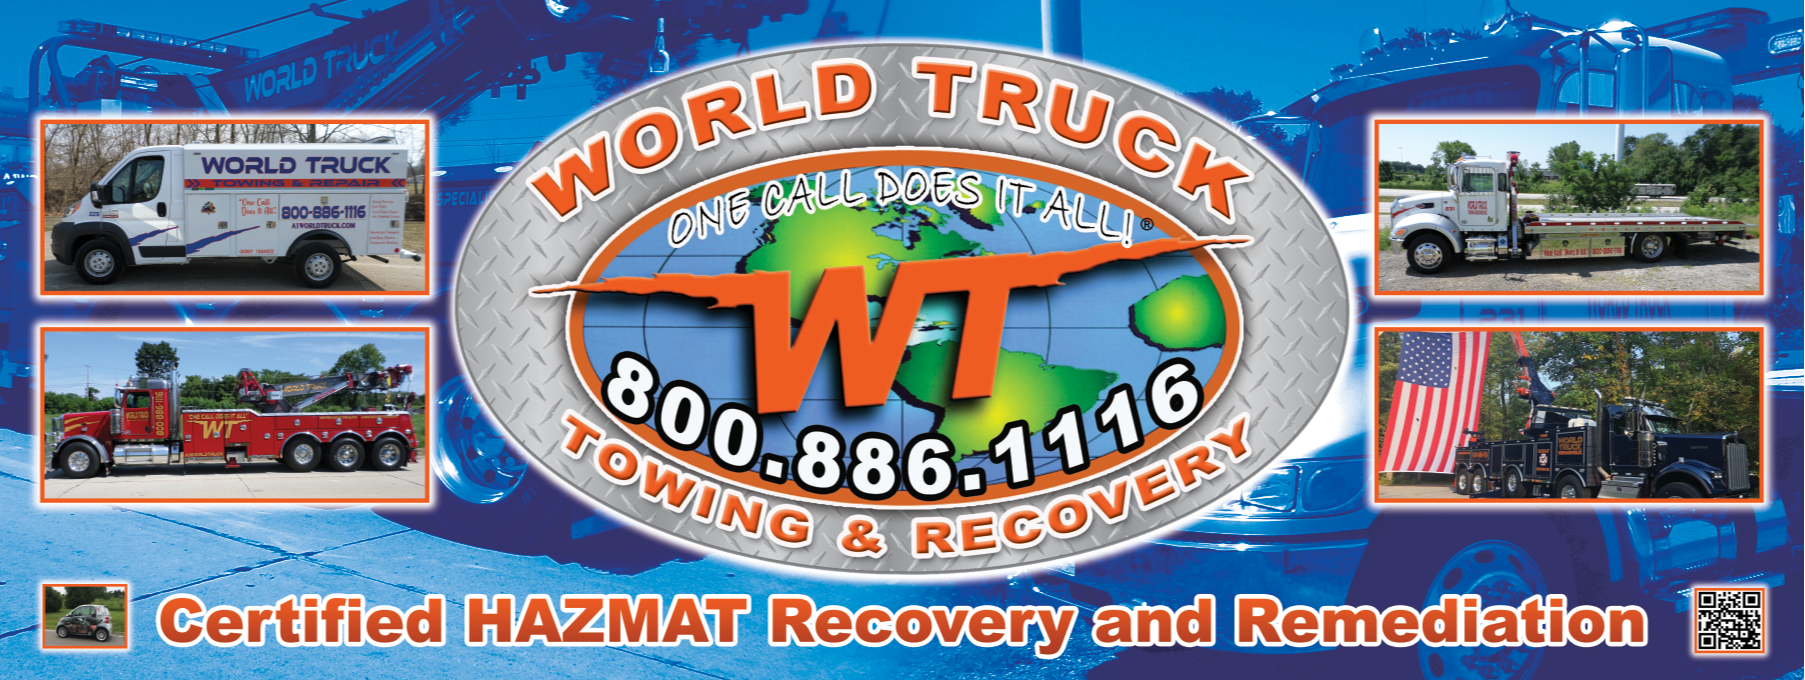 World Truck Towing & Recovery, INC. Towing.com Profile Banner